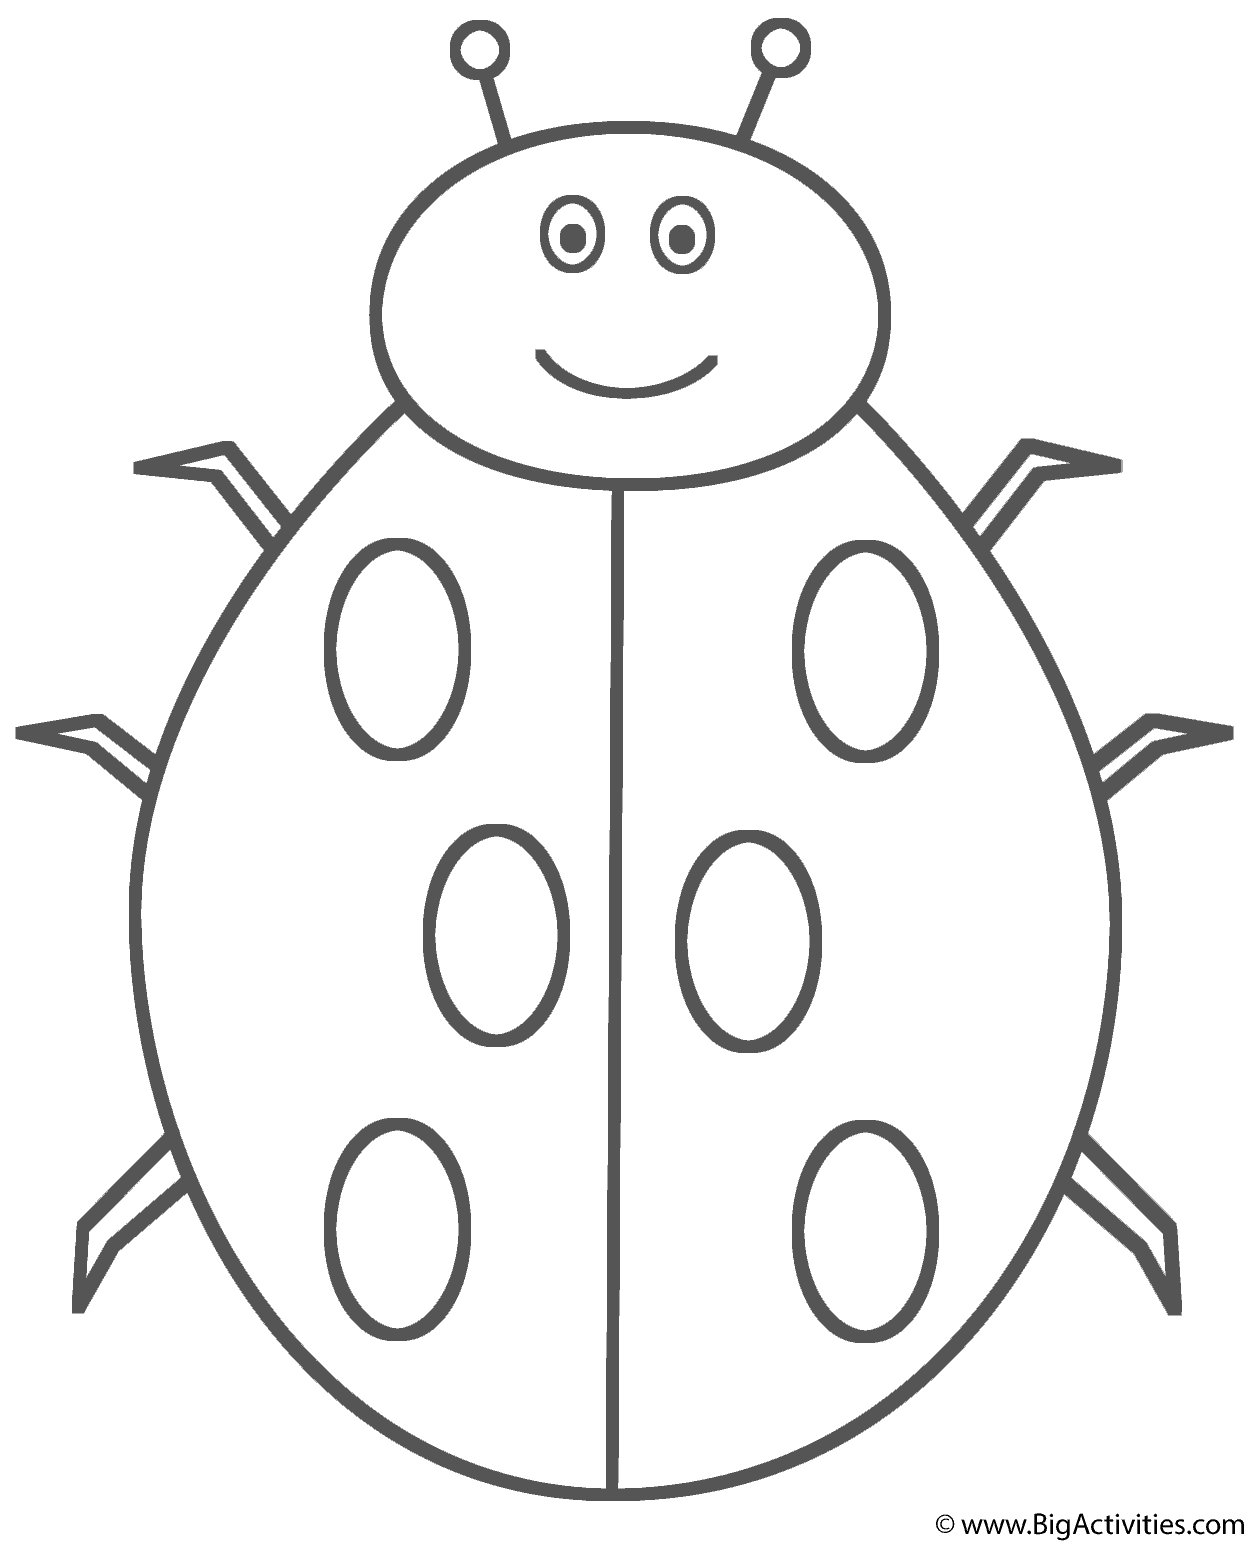 Ladybug Colouring Pages